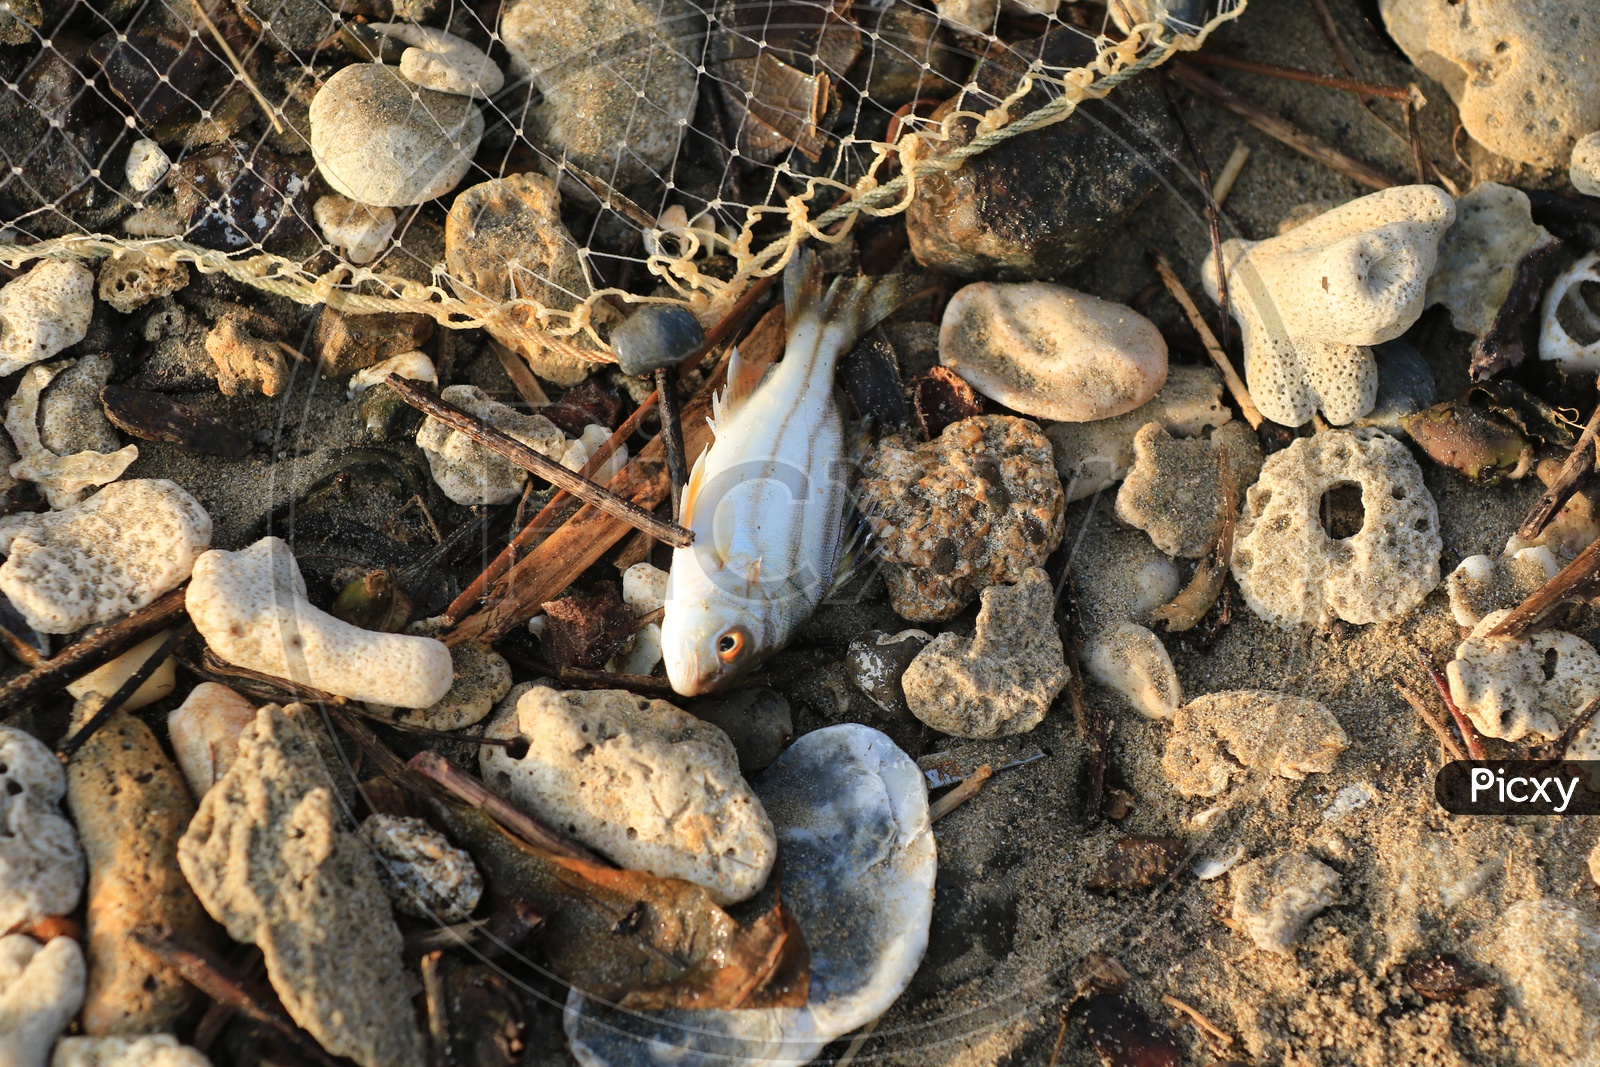 Dead white fish on the rocks